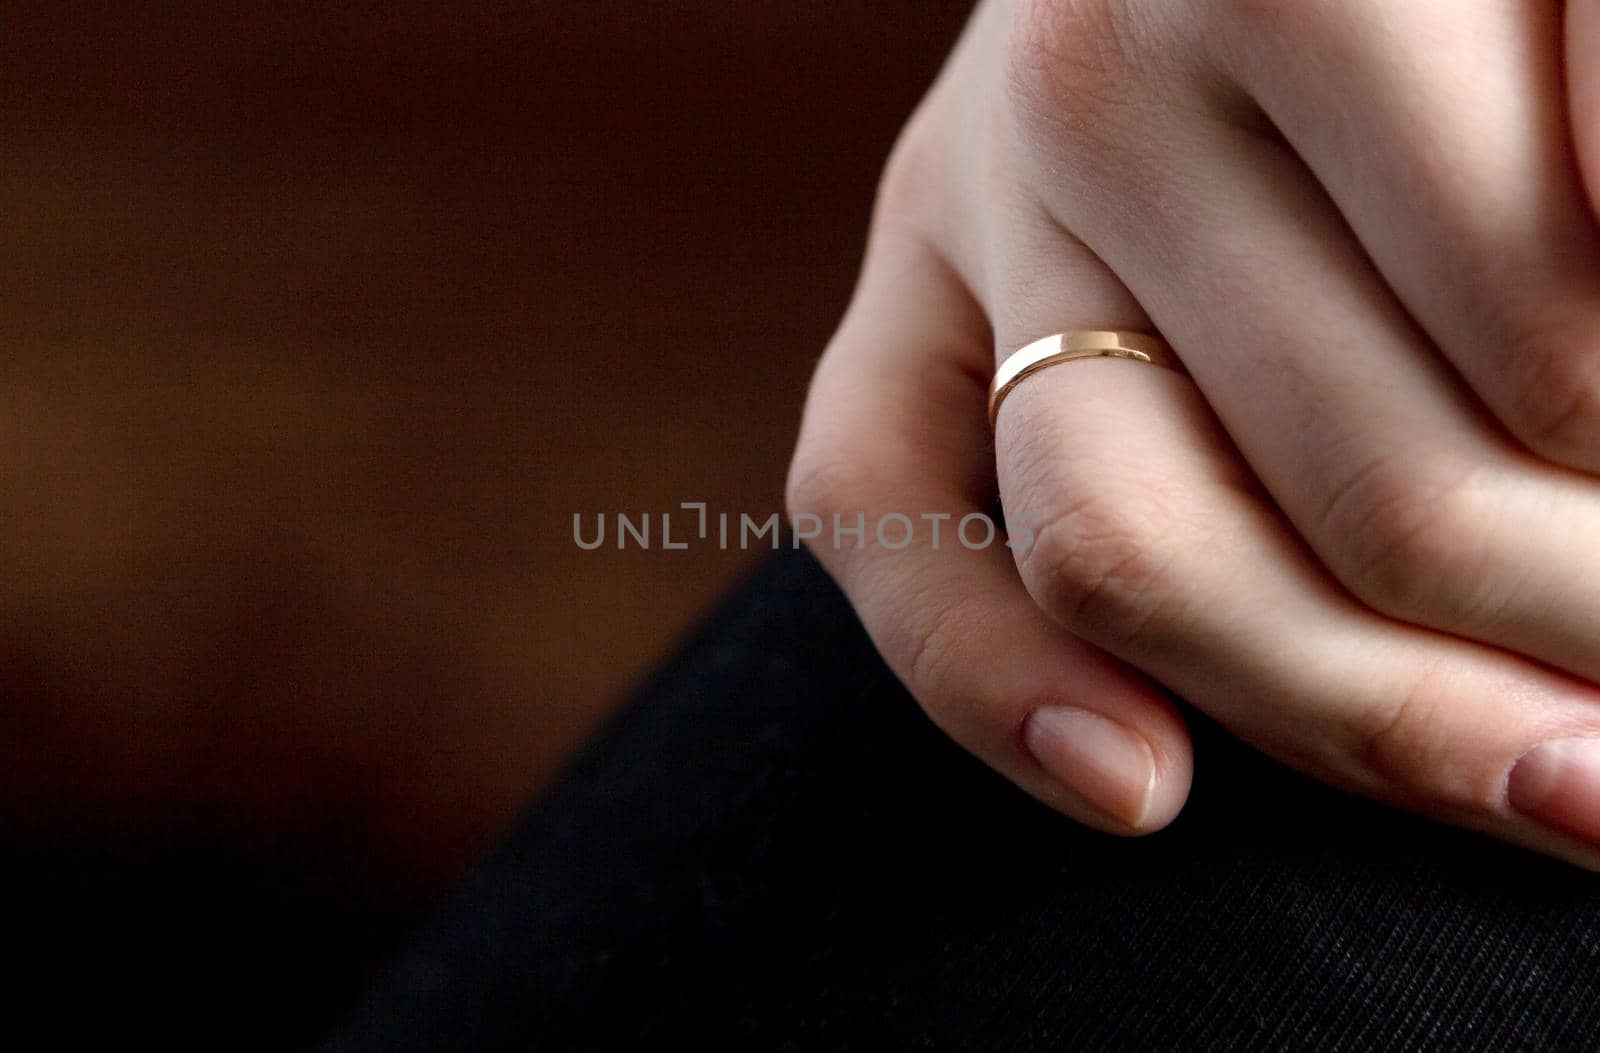 Closeup shot of a person s hand with a wedding ring on a brown surface. by lunarts